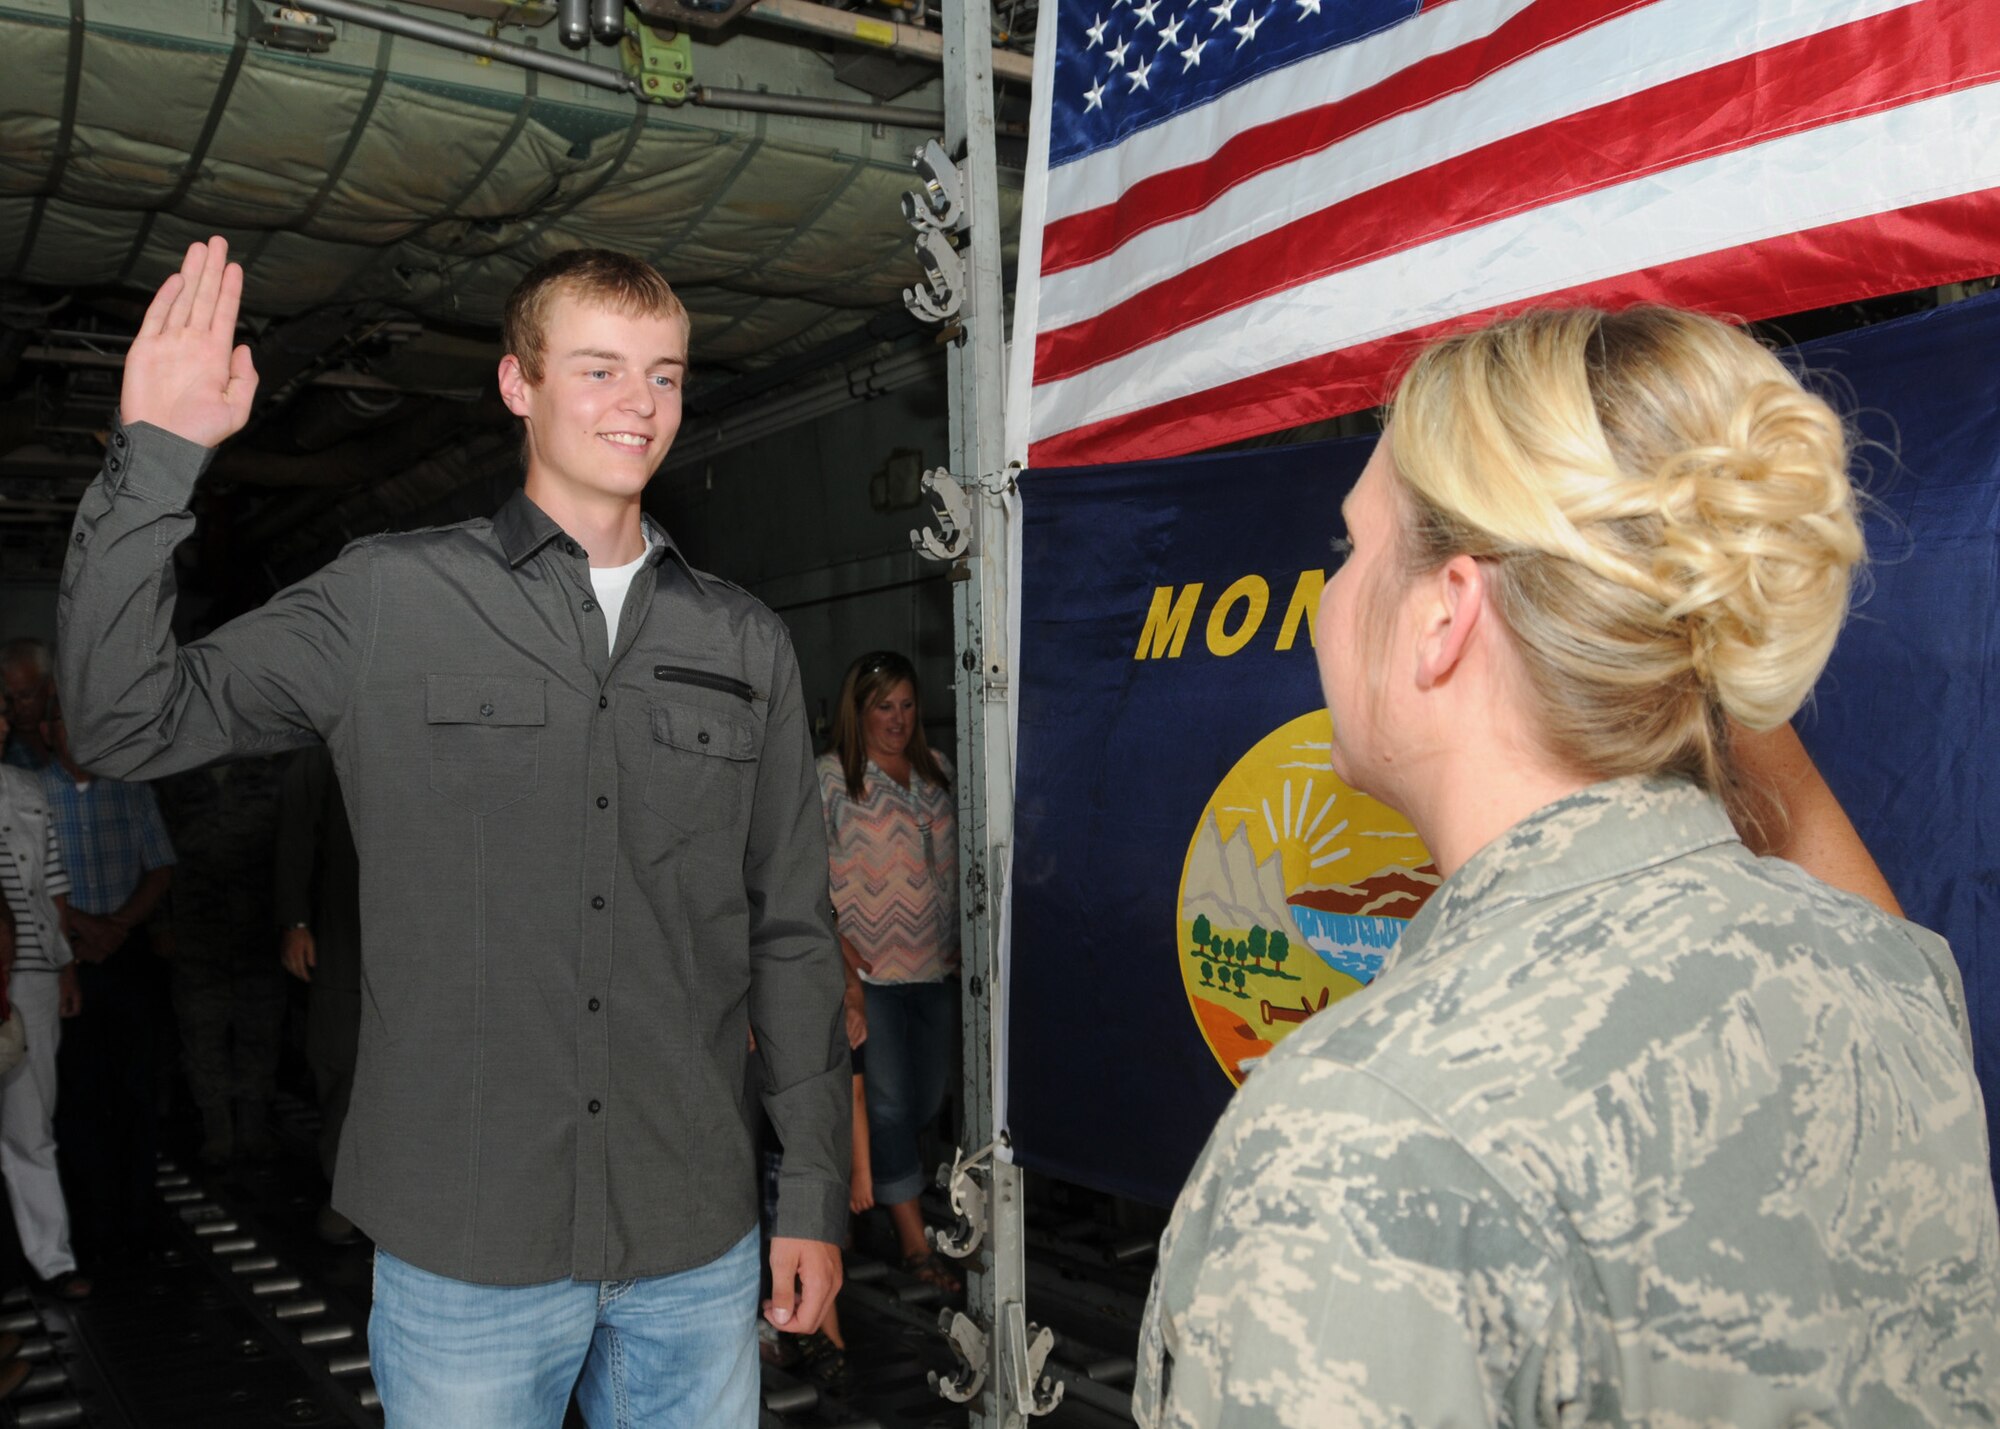 Tyler LaPierre recites the oath of enlistment during his Montana Air National Guard enlistment ceremony in the cargo hold of a C-130 Hercules transport aircraft parked at the 120th Airlift Wing in Great Falls, Mont. Aug. 31, 2016. His aunt, Capt. Jennifer LaPierre Gunter administered the oath. (U.S. Air National Guard photo by Senior Master Sgt. Eric Peterson)